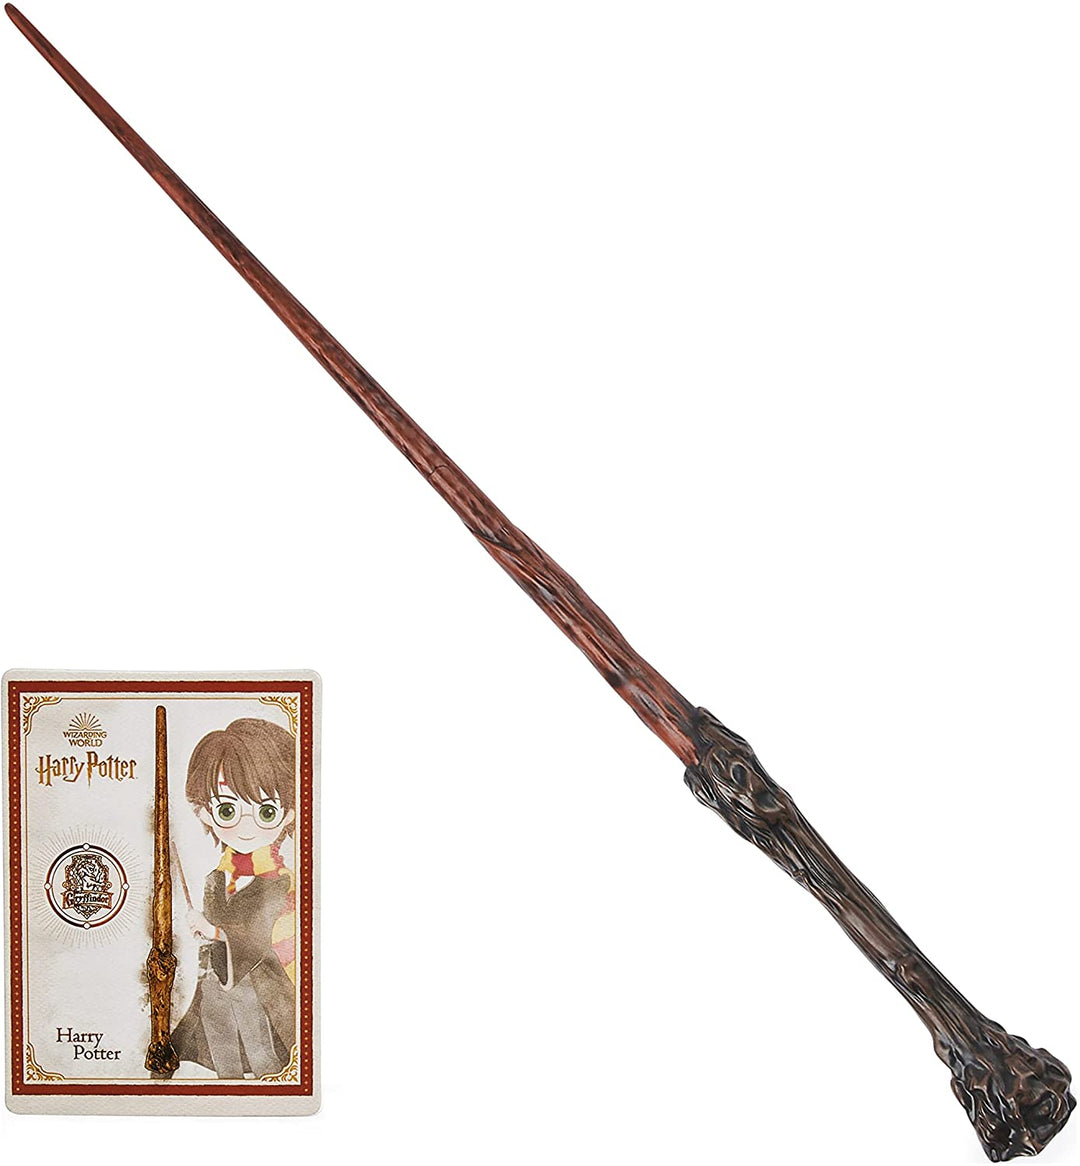 Wizarding World Authentic 12-inch Spellbinding Harry Potter Wand with Collectibl